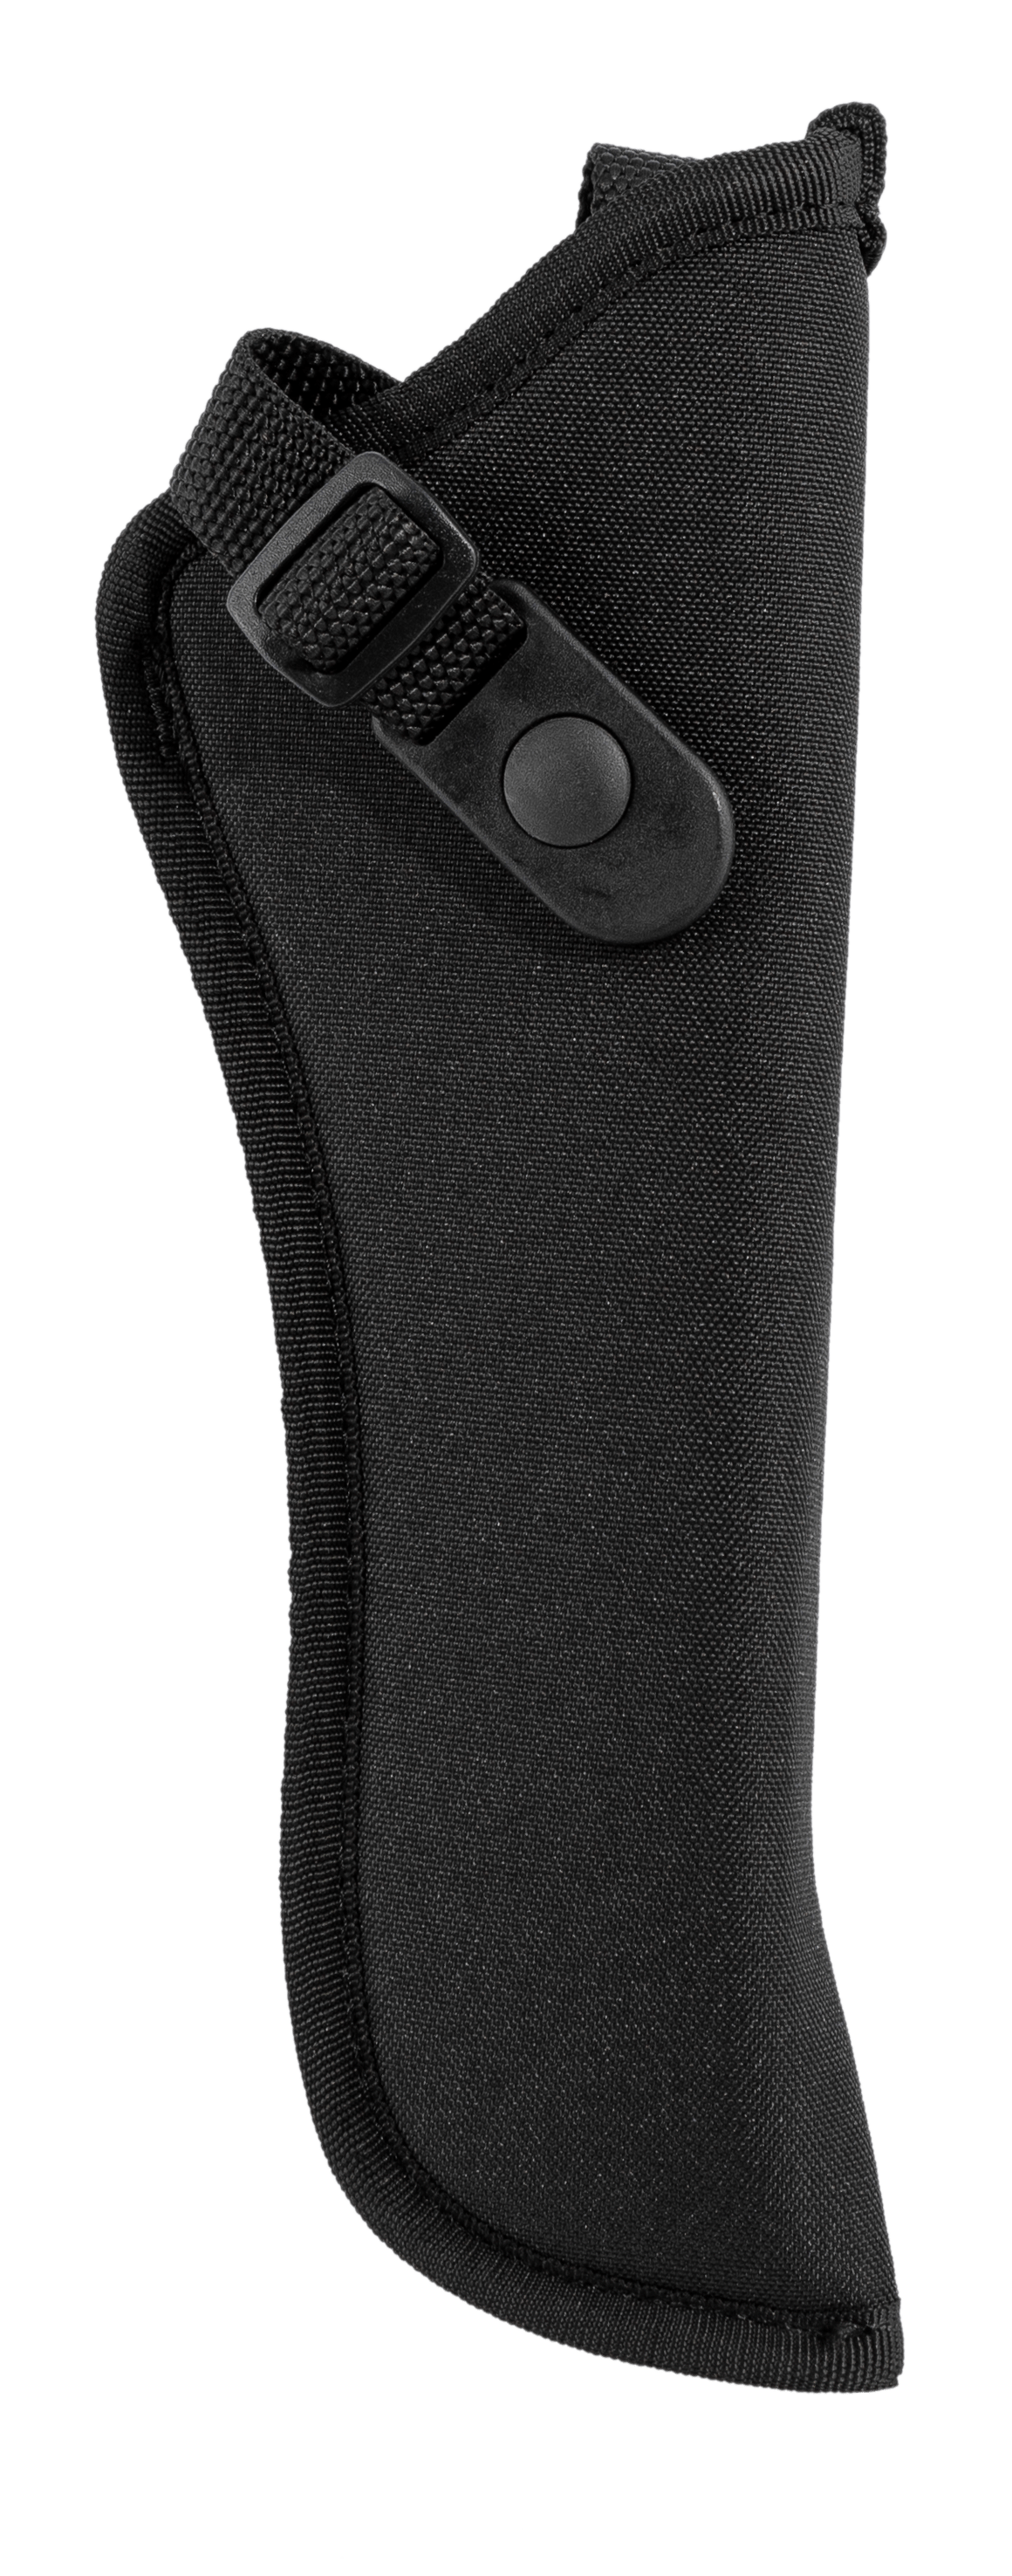 GunMate Gunmate Hip Holster #00 - Small Autos Nylon Black Holsters And Related Items